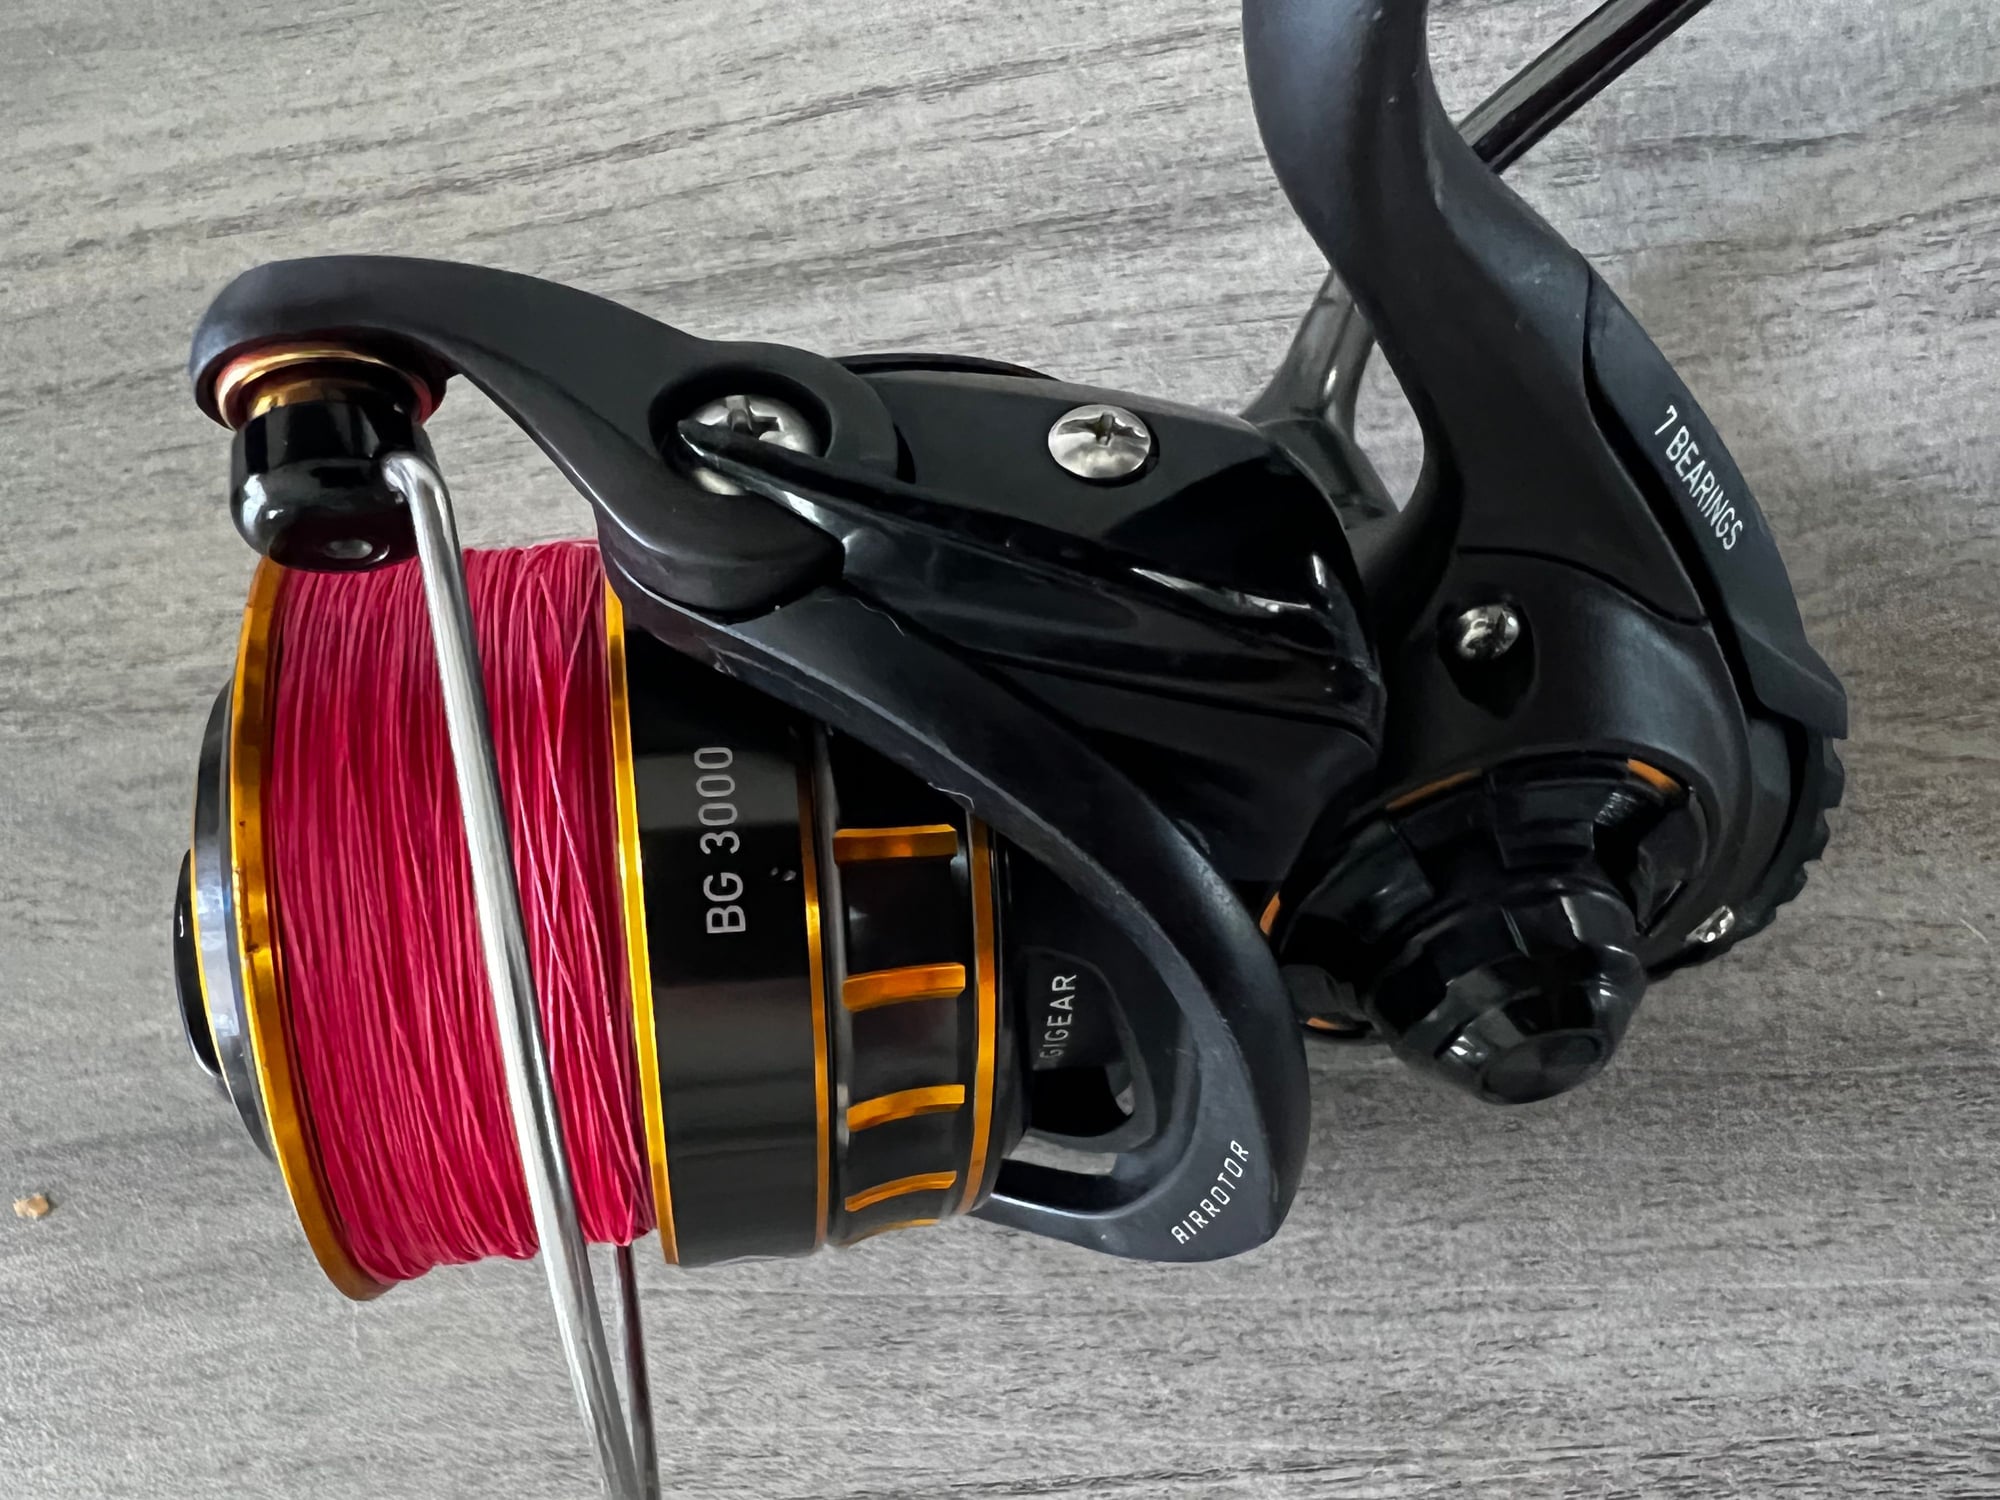 Daiwa BG 3000 for sale - The Hull Truth - Boating and Fishing Forum